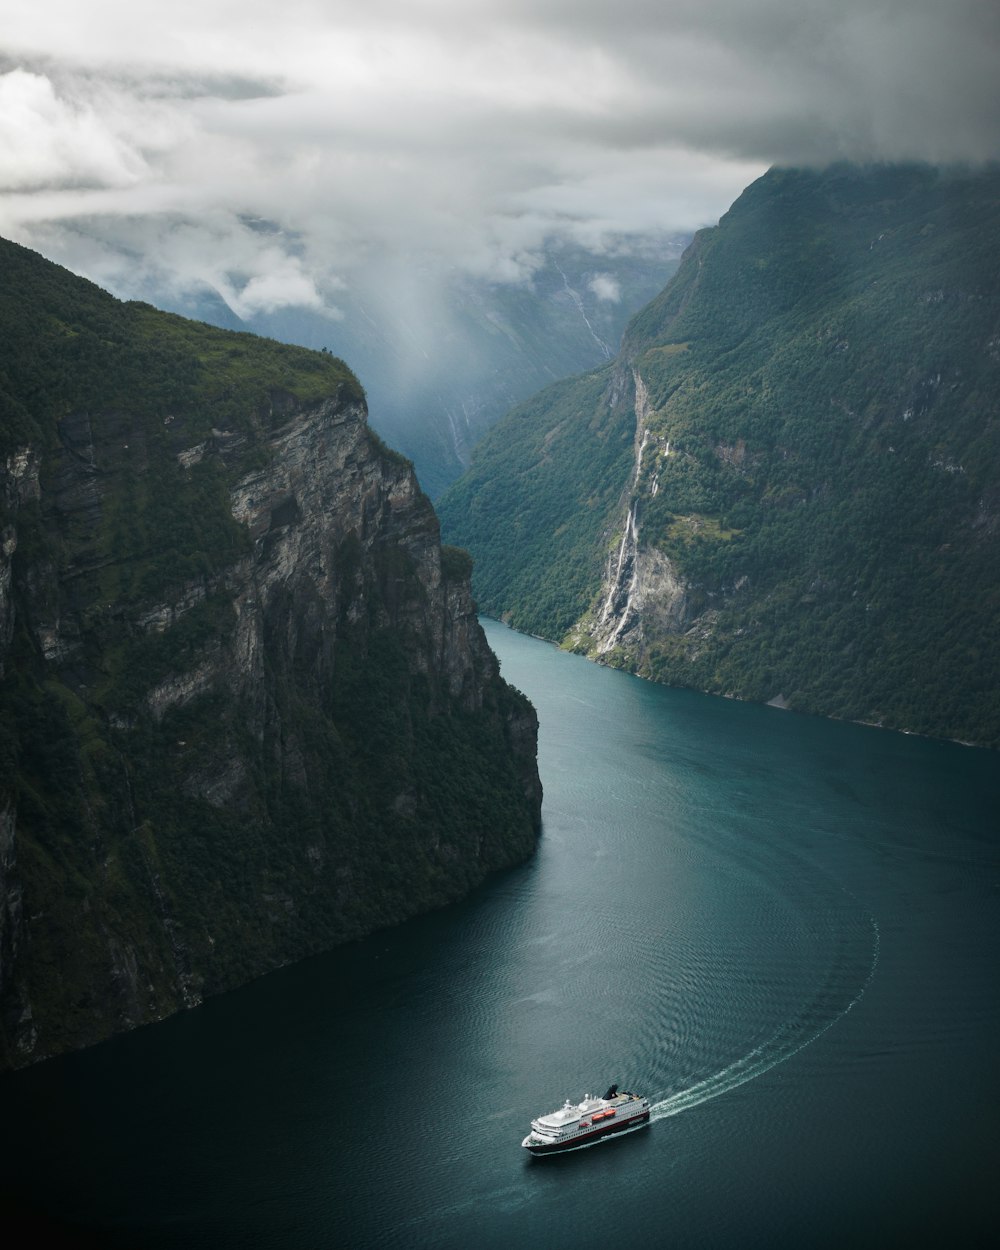 a boat in a body of water surrounded by mountains